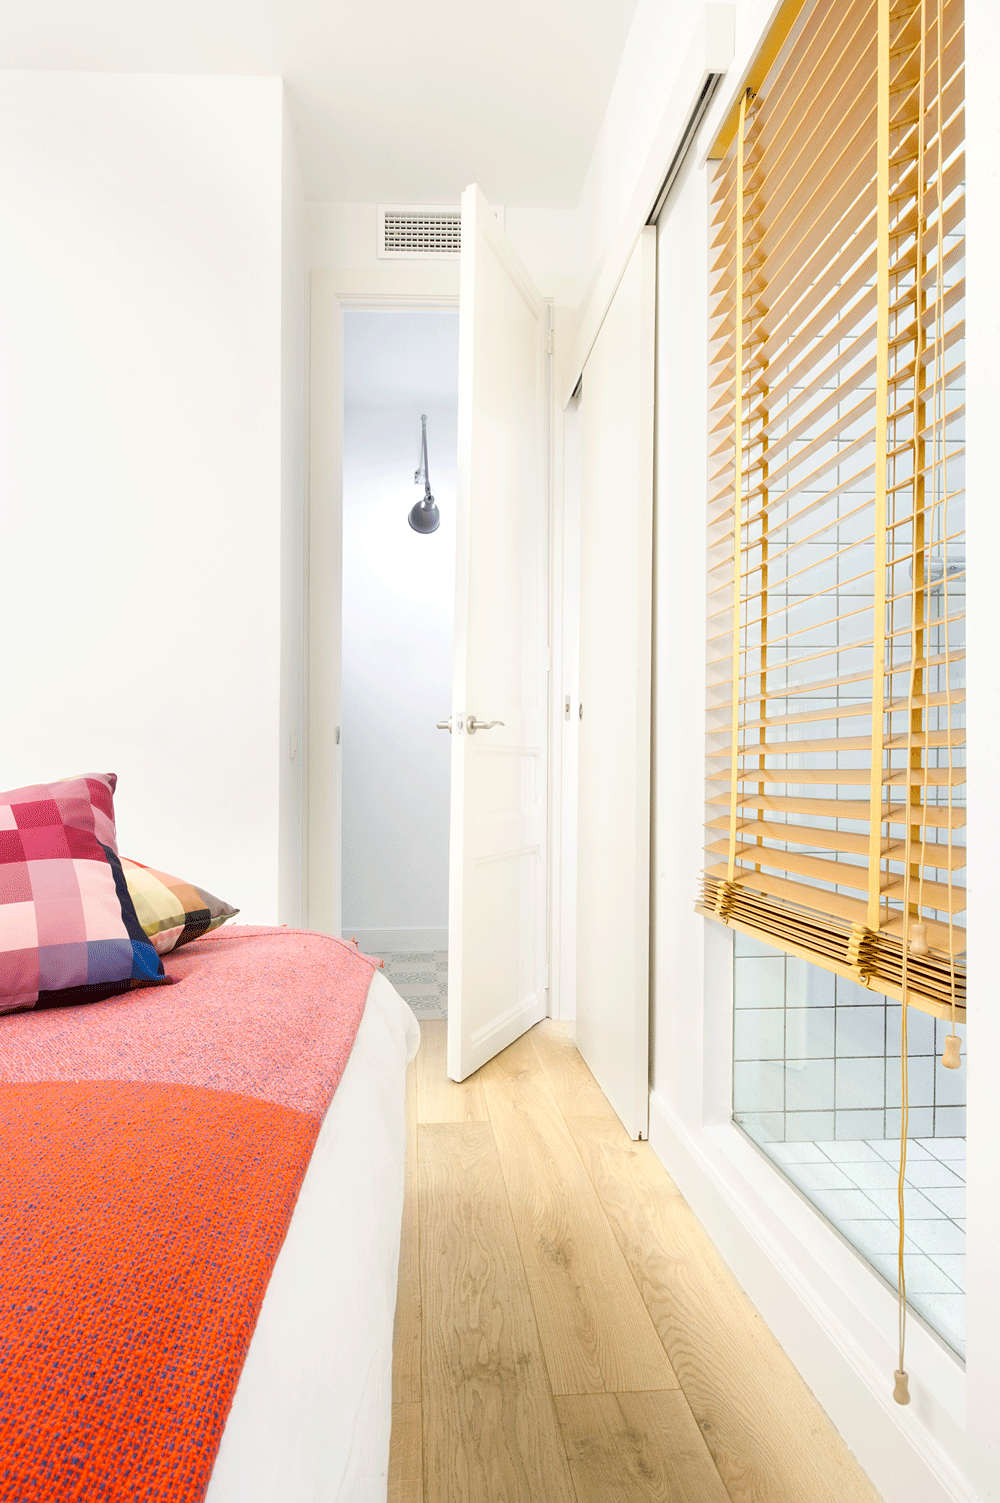 Excellent renovation performed with low budget - Flat in Barcelona - HomeWorldDesign (9)